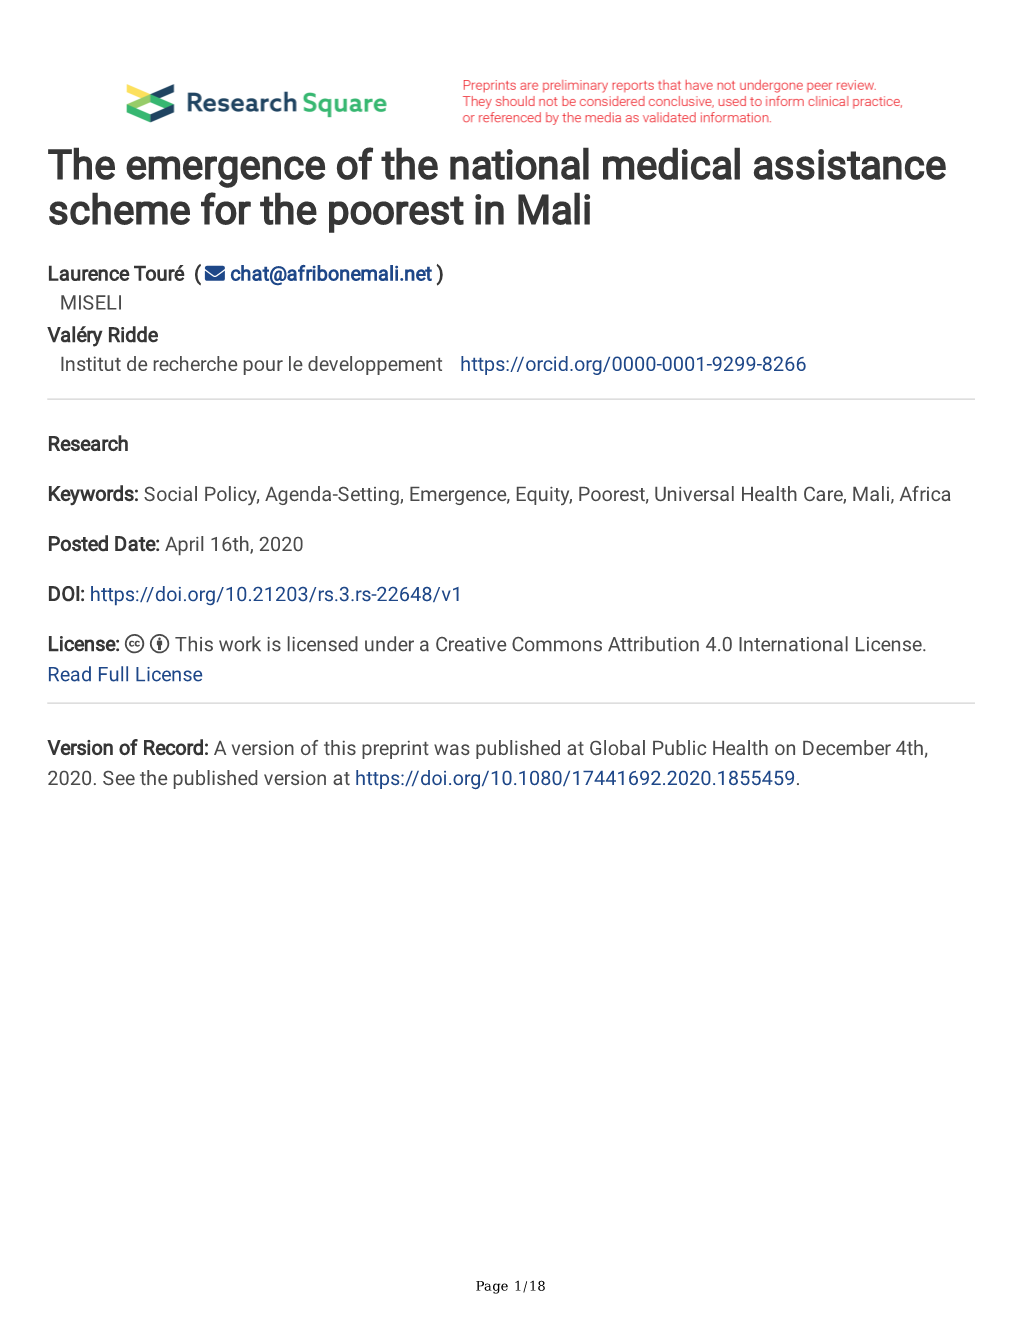 The Emergence of the National Medical Assistance Scheme for the Poorest in Mali